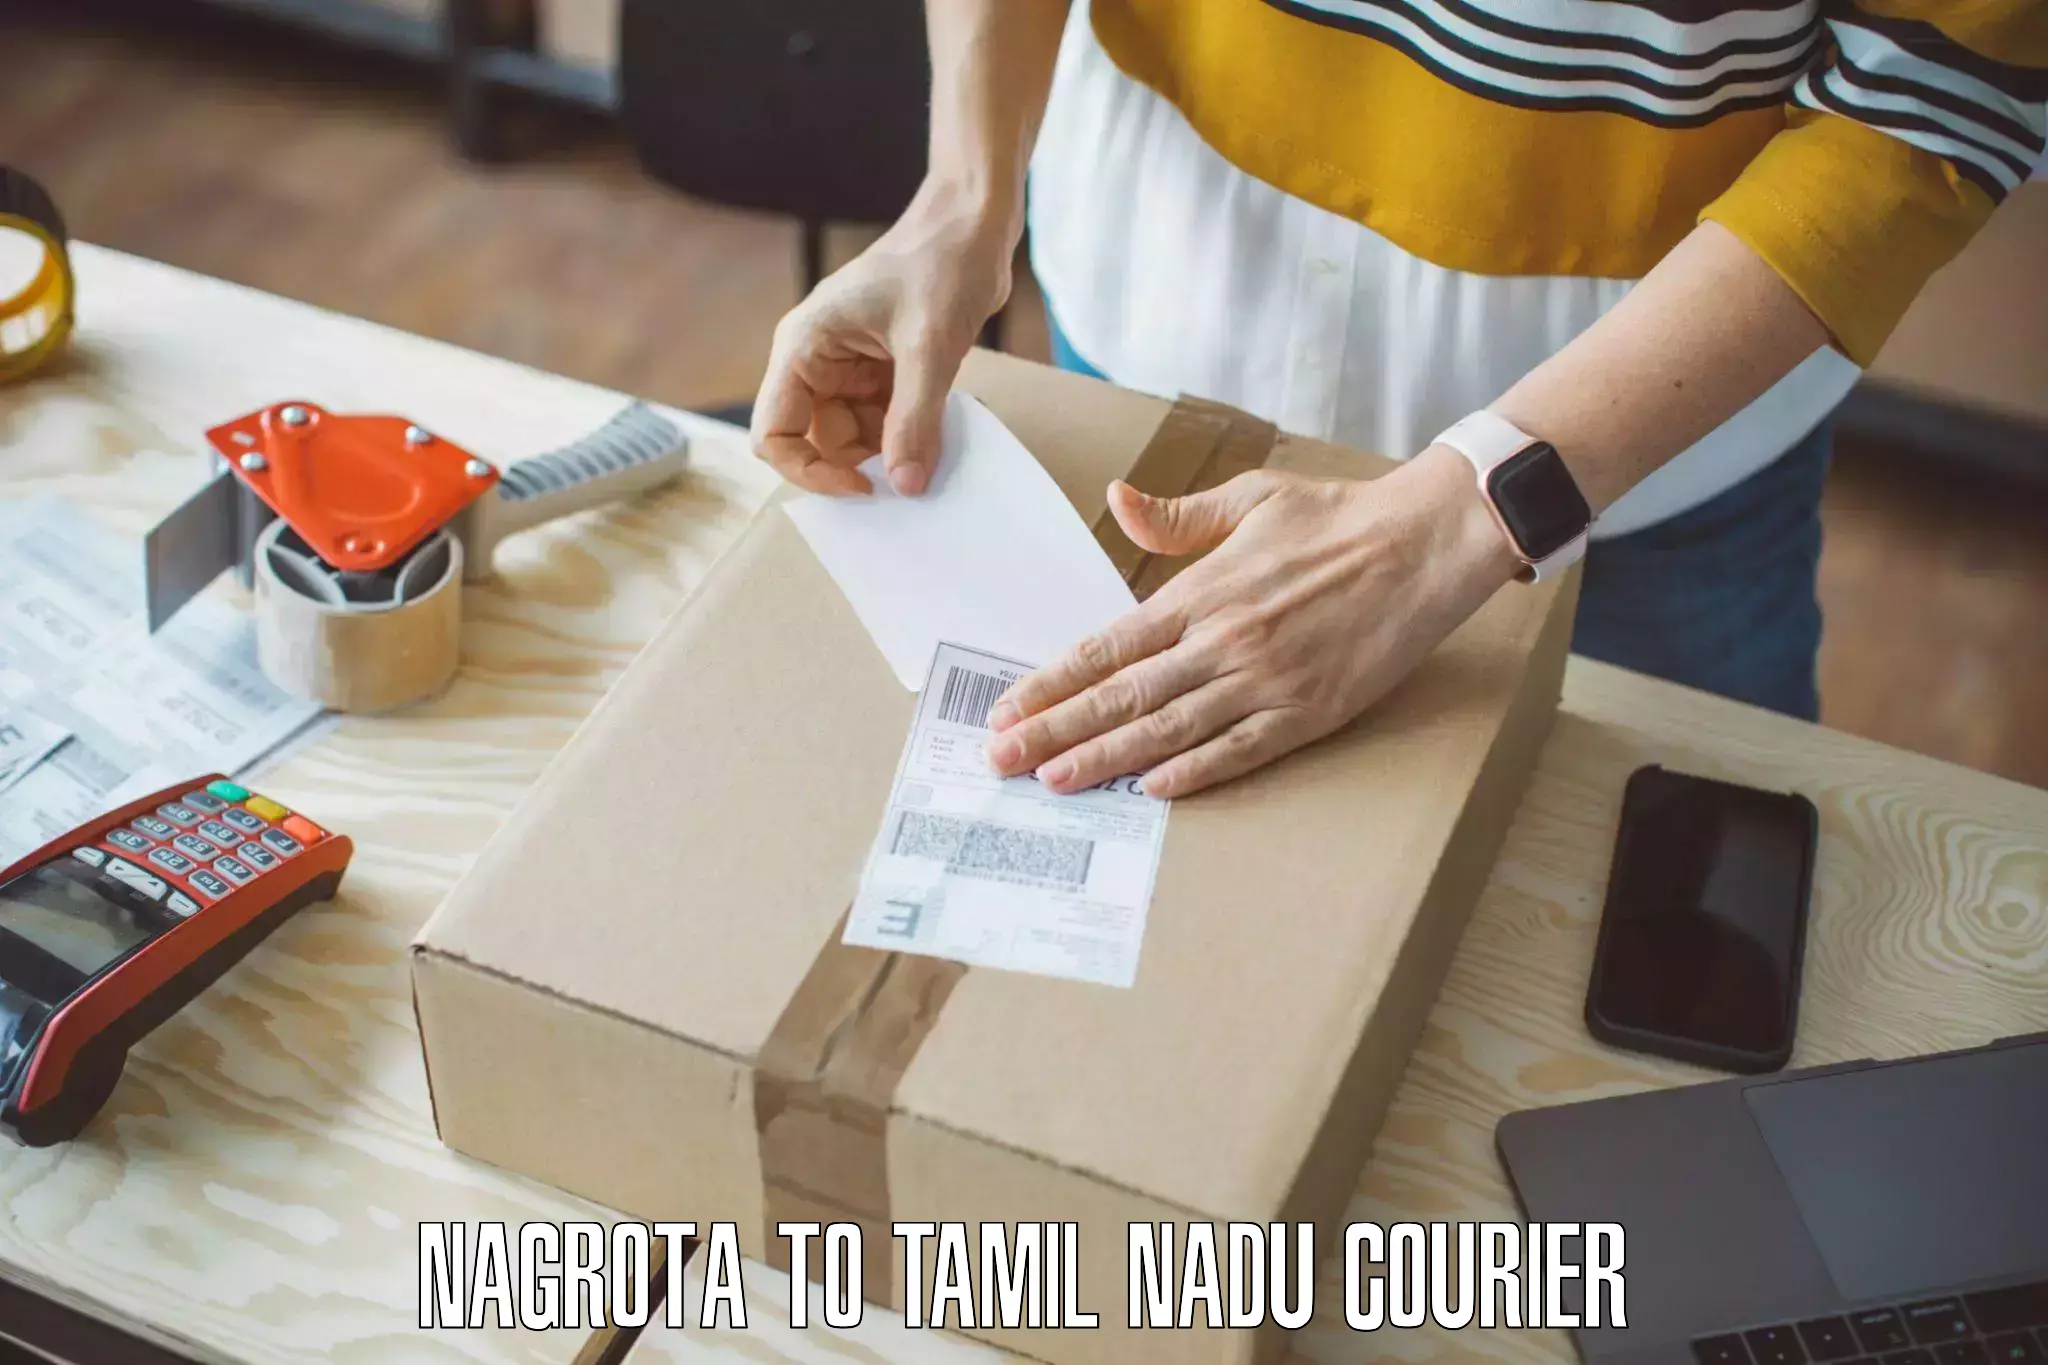 Quality moving company in Nagrota to Coimbatore